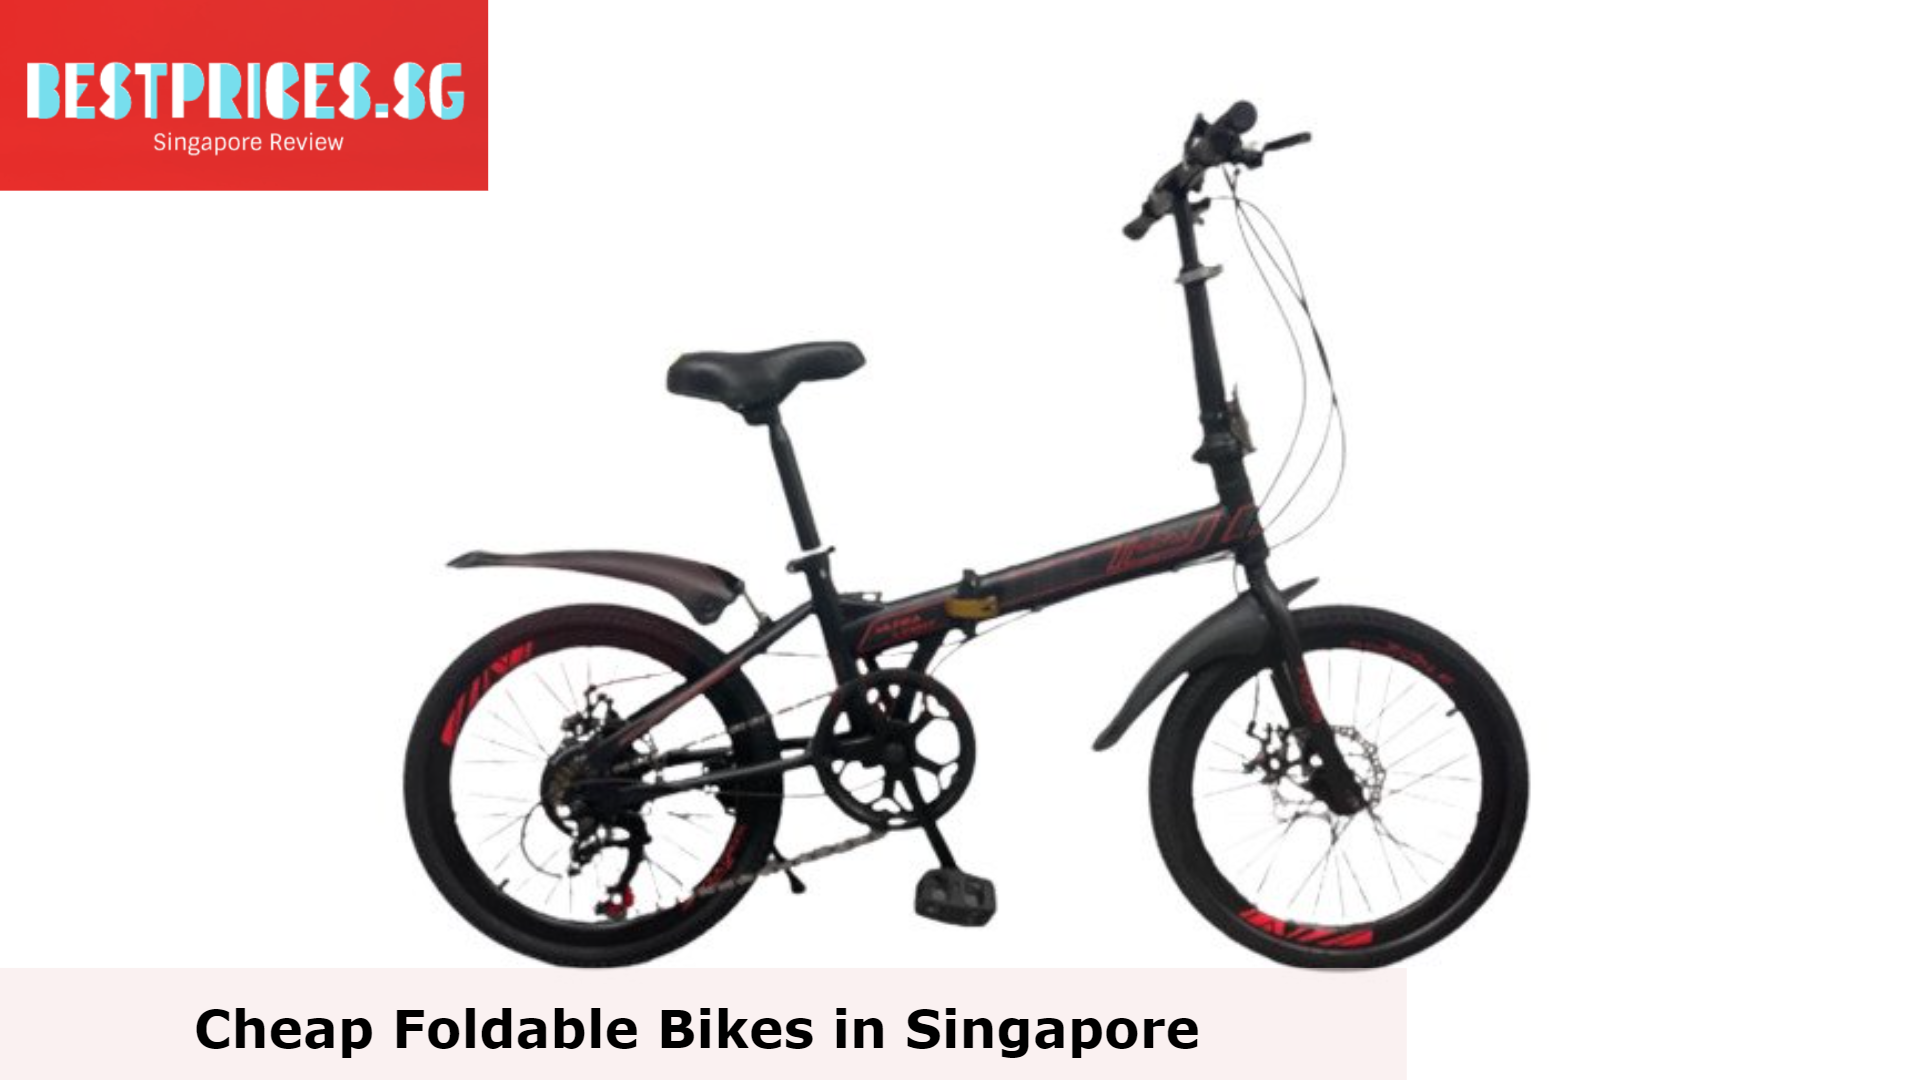 SGCYCL Foldable Bike - Cheap Foldable Bikes in Singapore,  Cheap Foldable Bike, Where can I buy an affordable foldable bike in Singapore, Are foldable bikes worth it Singapore?
What is the best folding bike in Singapore?, Can I bring a foldable bike in MRT in Singapore?, What is the price of foldable bicycle?,  Folding Bike Singapore, lightweight folding bike, lightweight folding bike singapore, best foldable bike singapore, where to buy folding bike in singapore, foldable bicycle shop singapore, 3sixty folding bike singapore, best budget folding bike singapore, decathlon foldable bike, bolt classic foldable bike review, Singapore, 